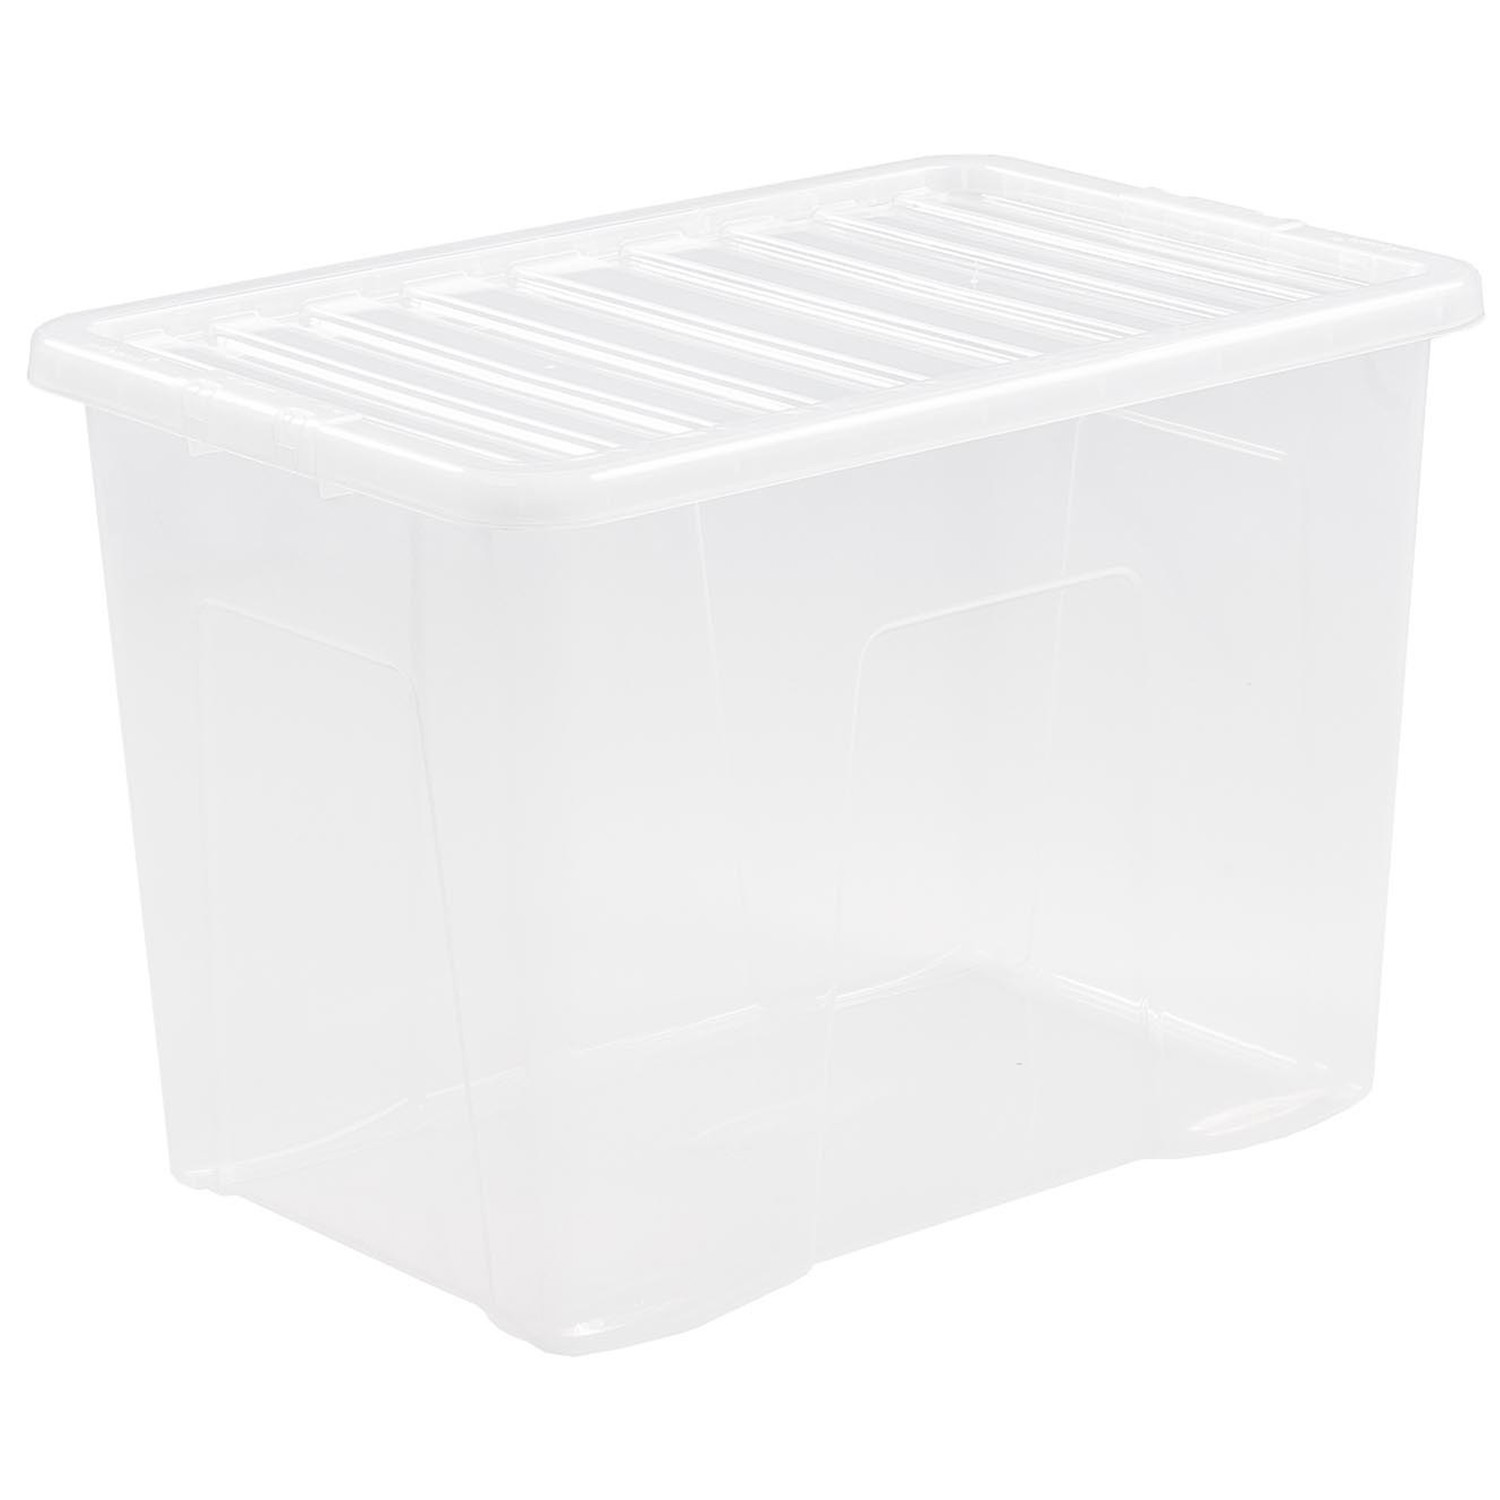 Wham 80L Clear Crystal Storage Box with Lid Image